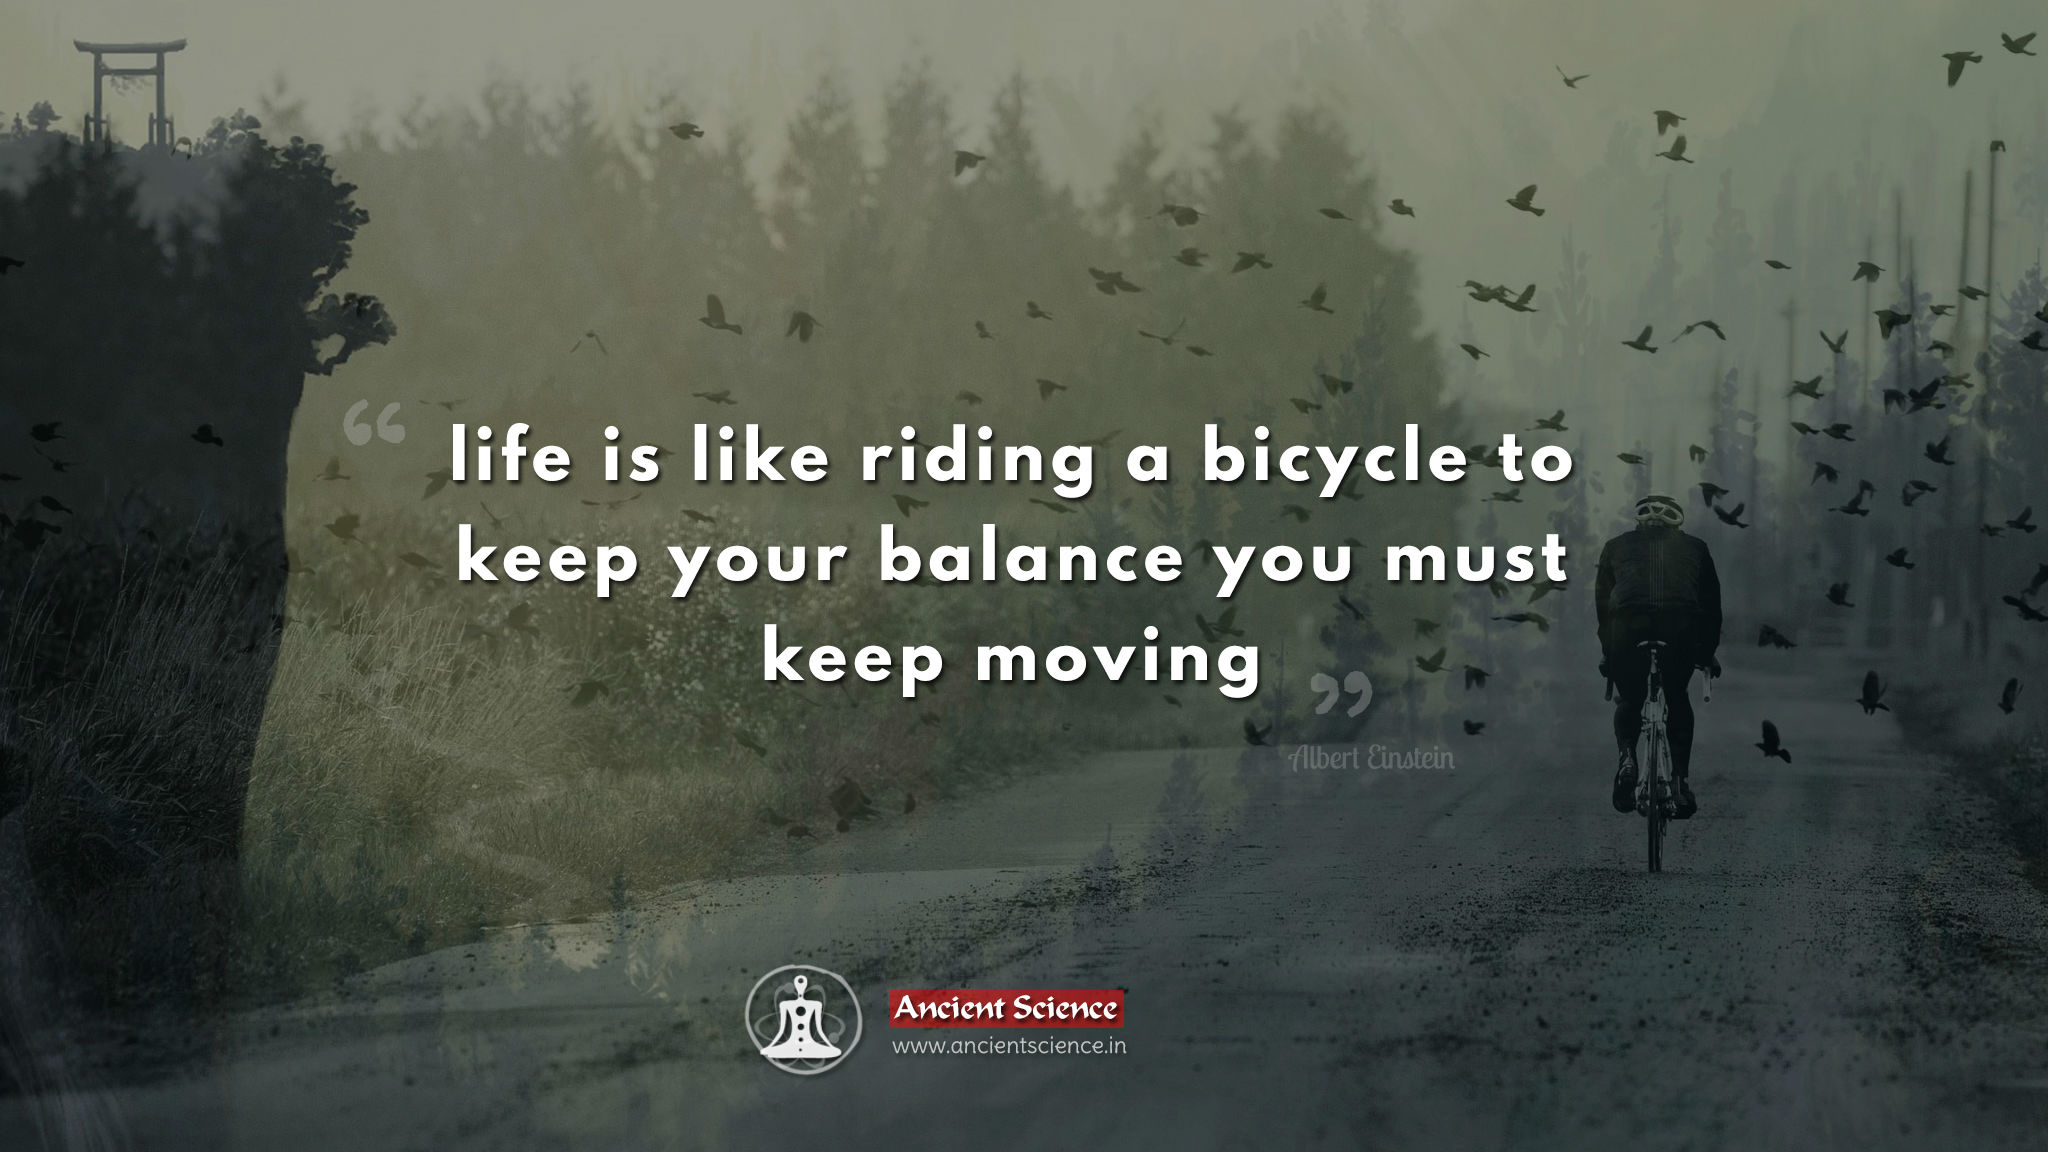 life is like riding a bicycle to keep your balance you must keep moving